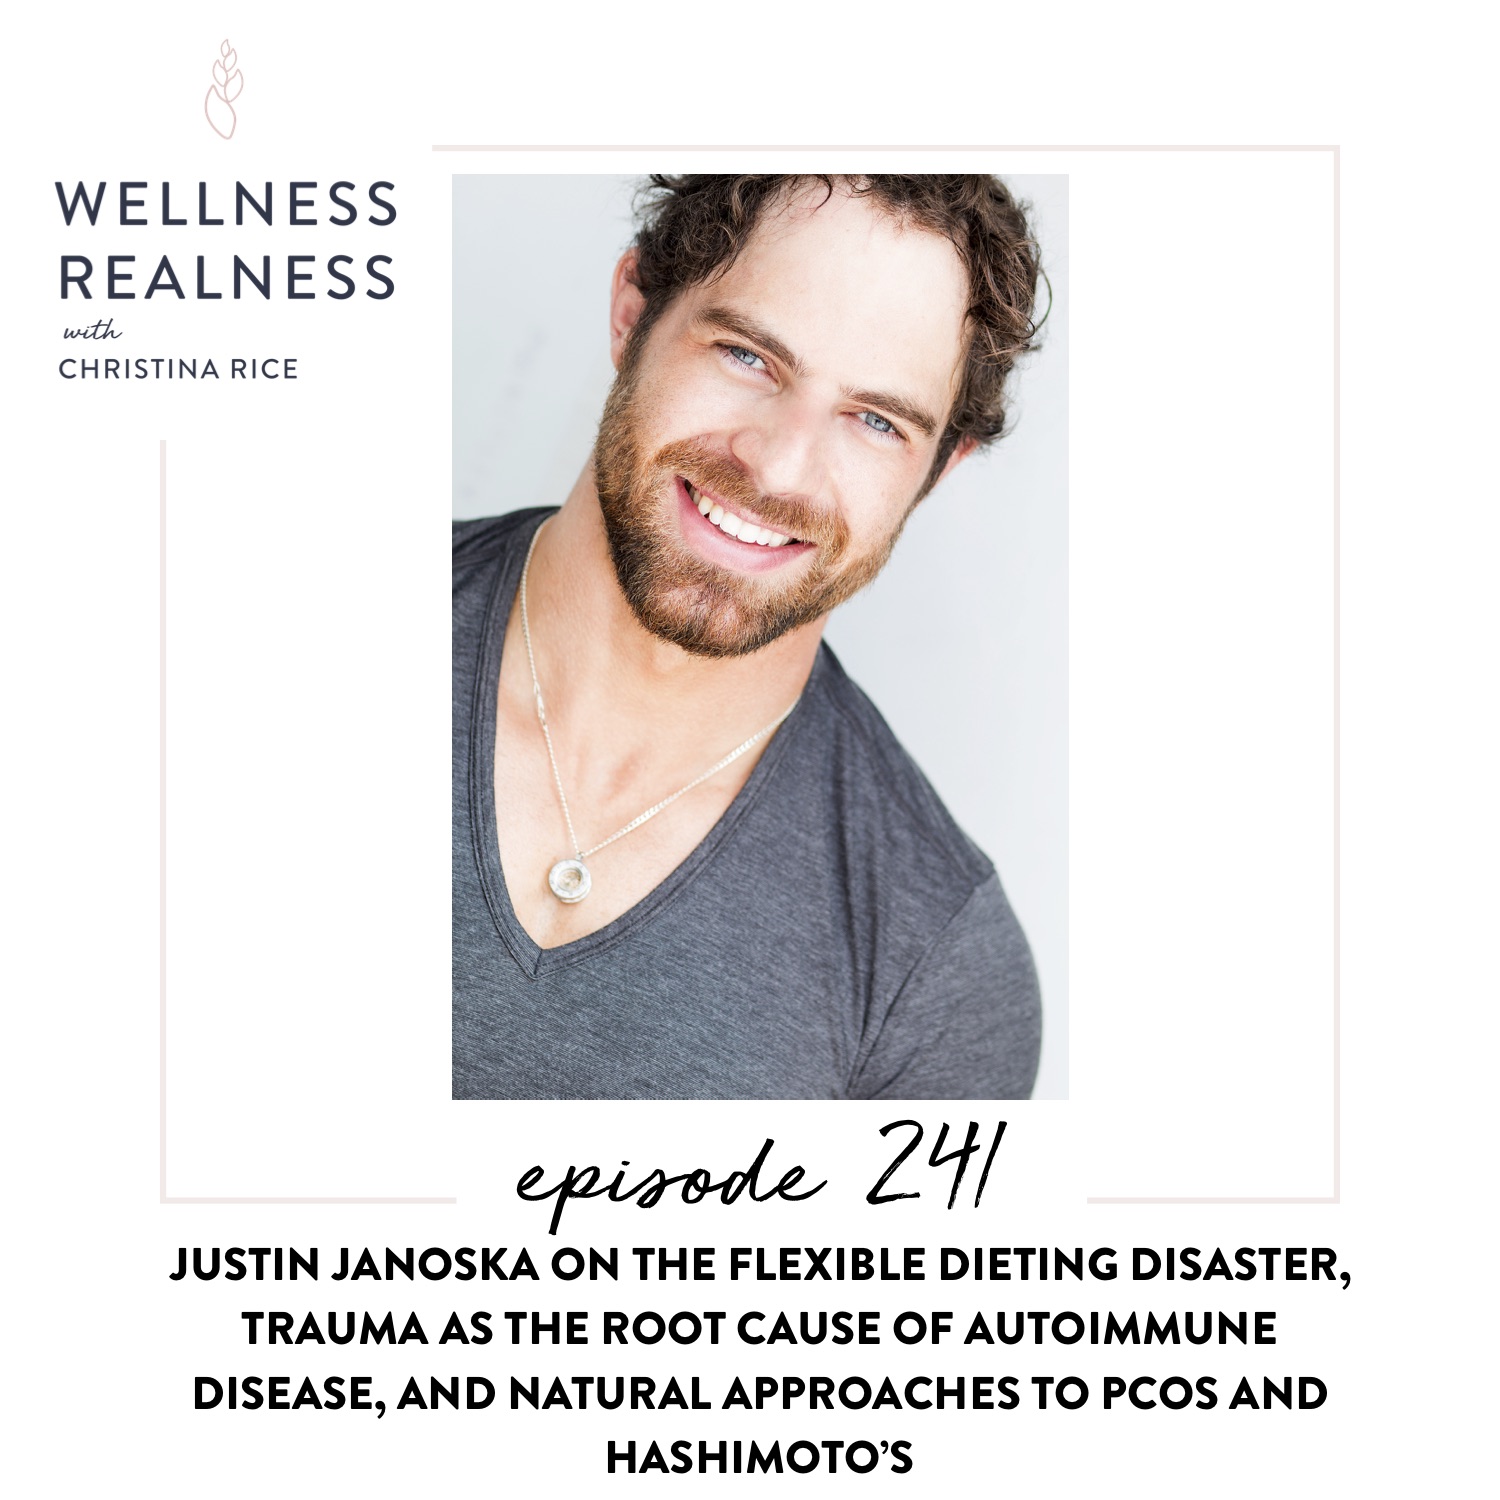 241: Justin Janoska on the Flexible Dieting Disaster, Trauma as the Root of Autoimmune Disease, and Natural Approaches to PCOS and Hashimoto’s